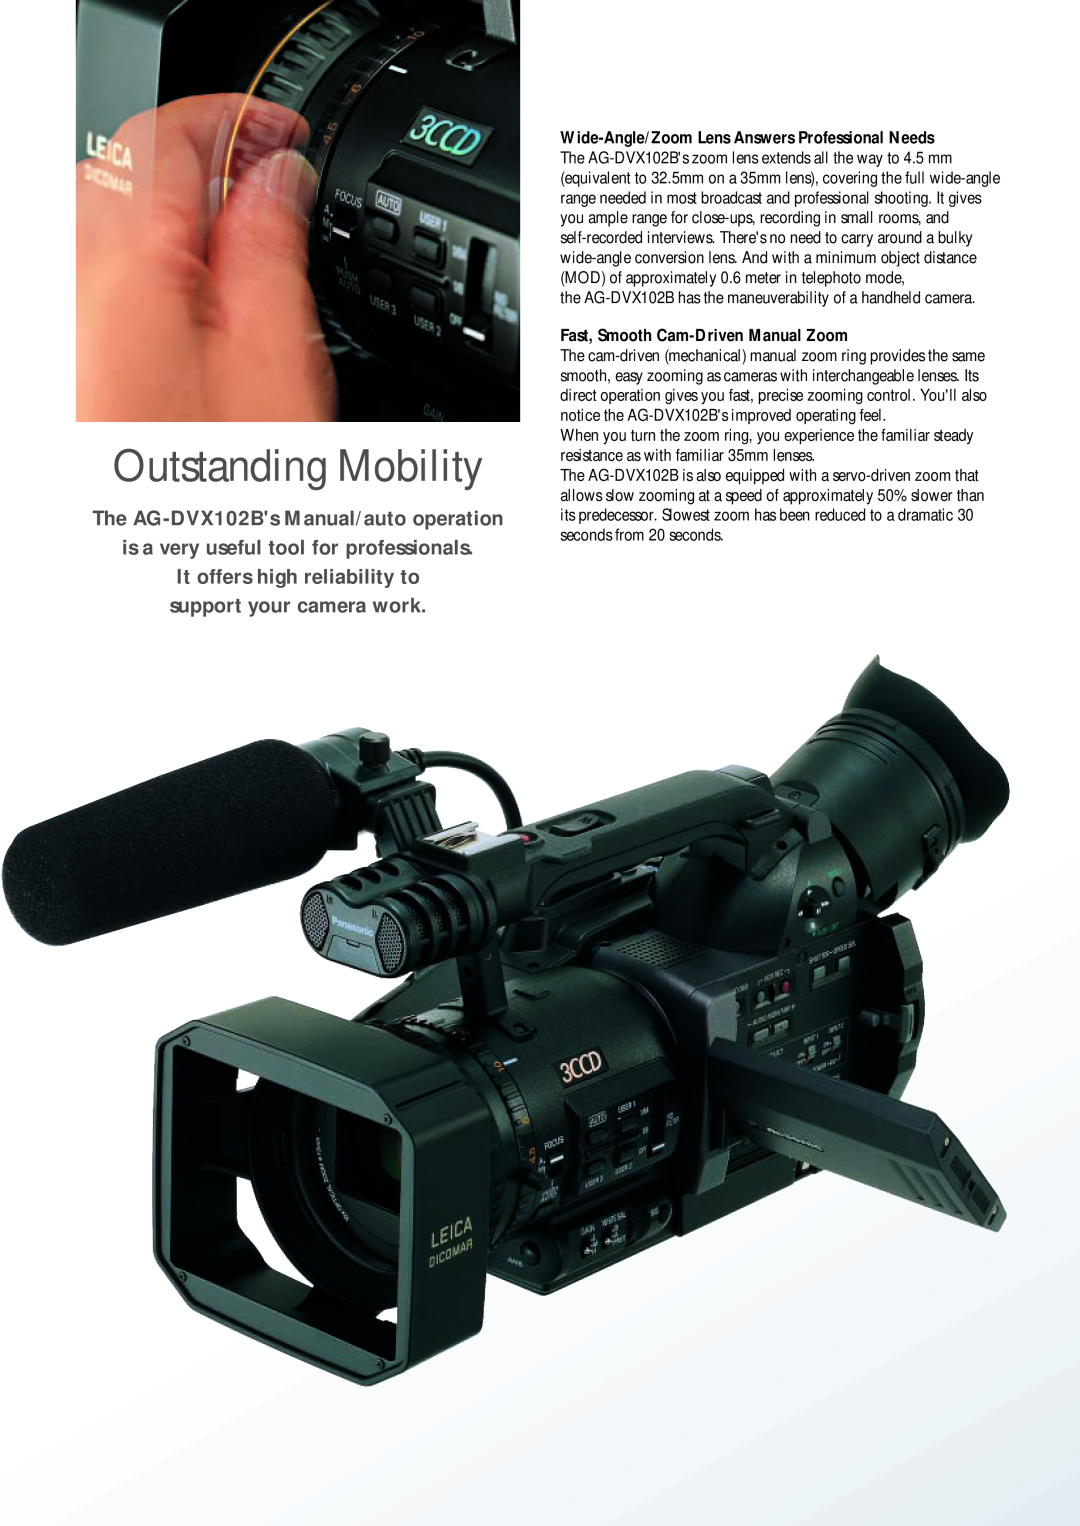 Panasonic manual Outstanding Mobility, The AG-DVX102Bs Manual/auto operation, is a very useful tool for professionals 